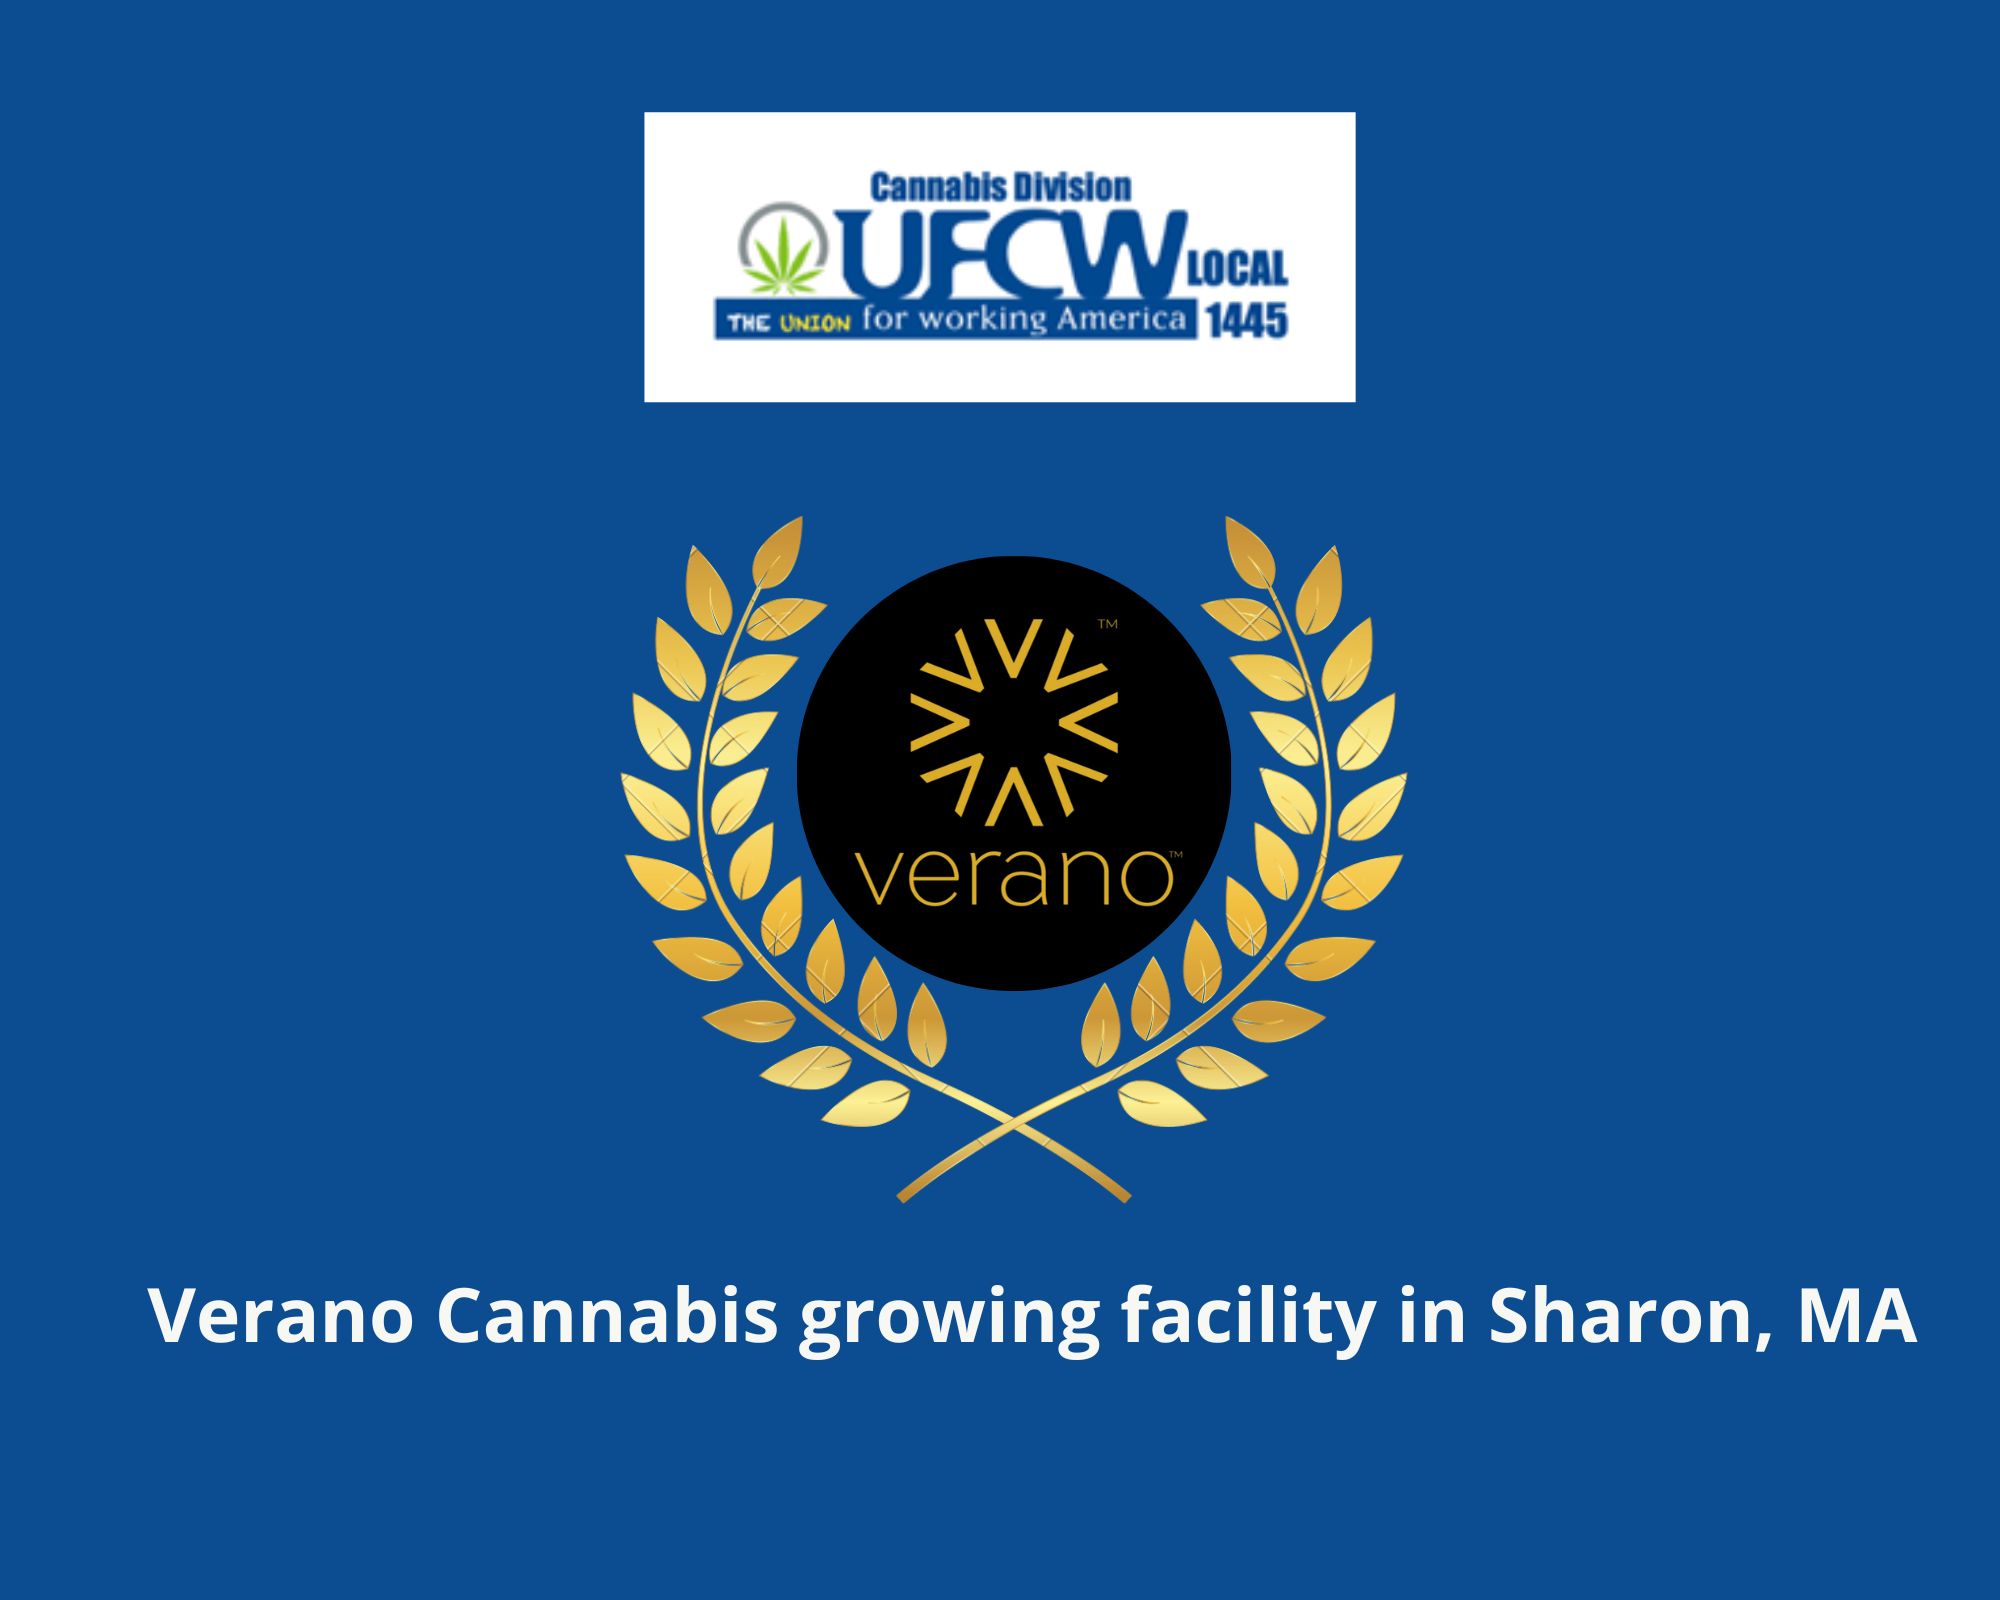 May be an image of text that says 'Cannabis Division UFCW LOCAL THE UNION or working America 1445 Victory! Verano Cannabis Cultivation Workers join CEA Local 1445 1445 verano'